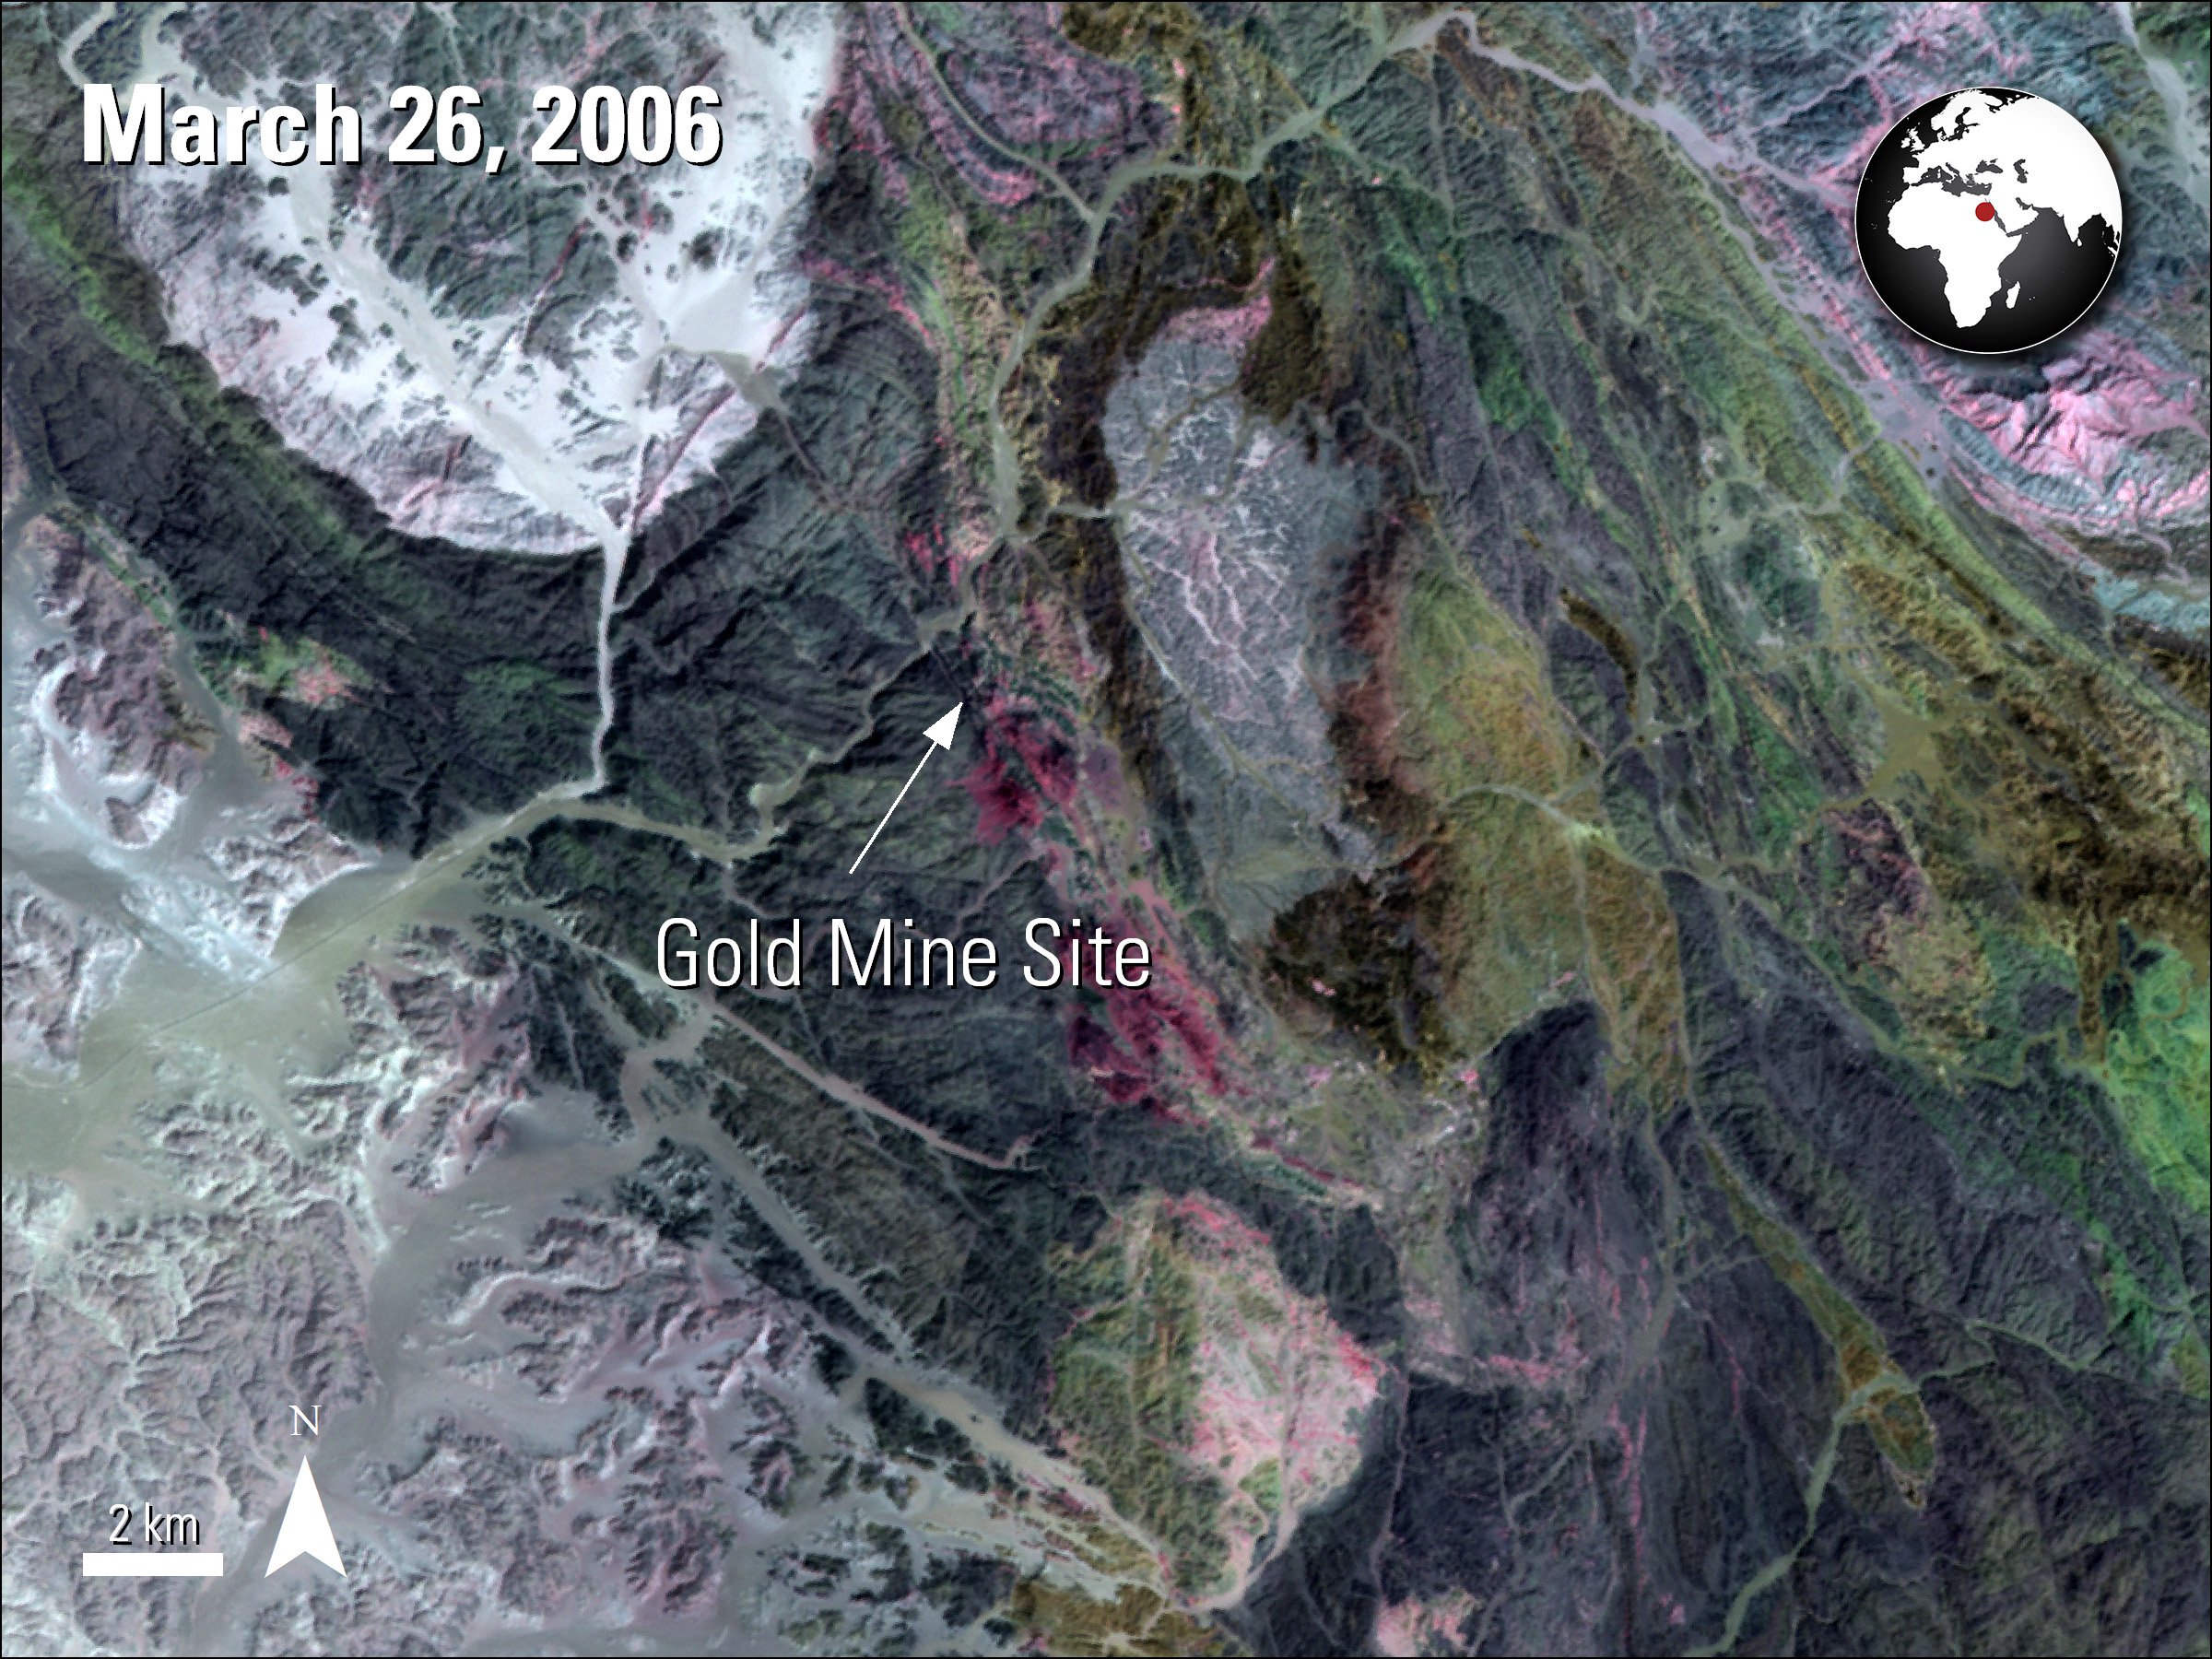 Terra ASTER SWIR data (AST_L1T) over a gold mine site in Egypt, acquired March 26, 2006..